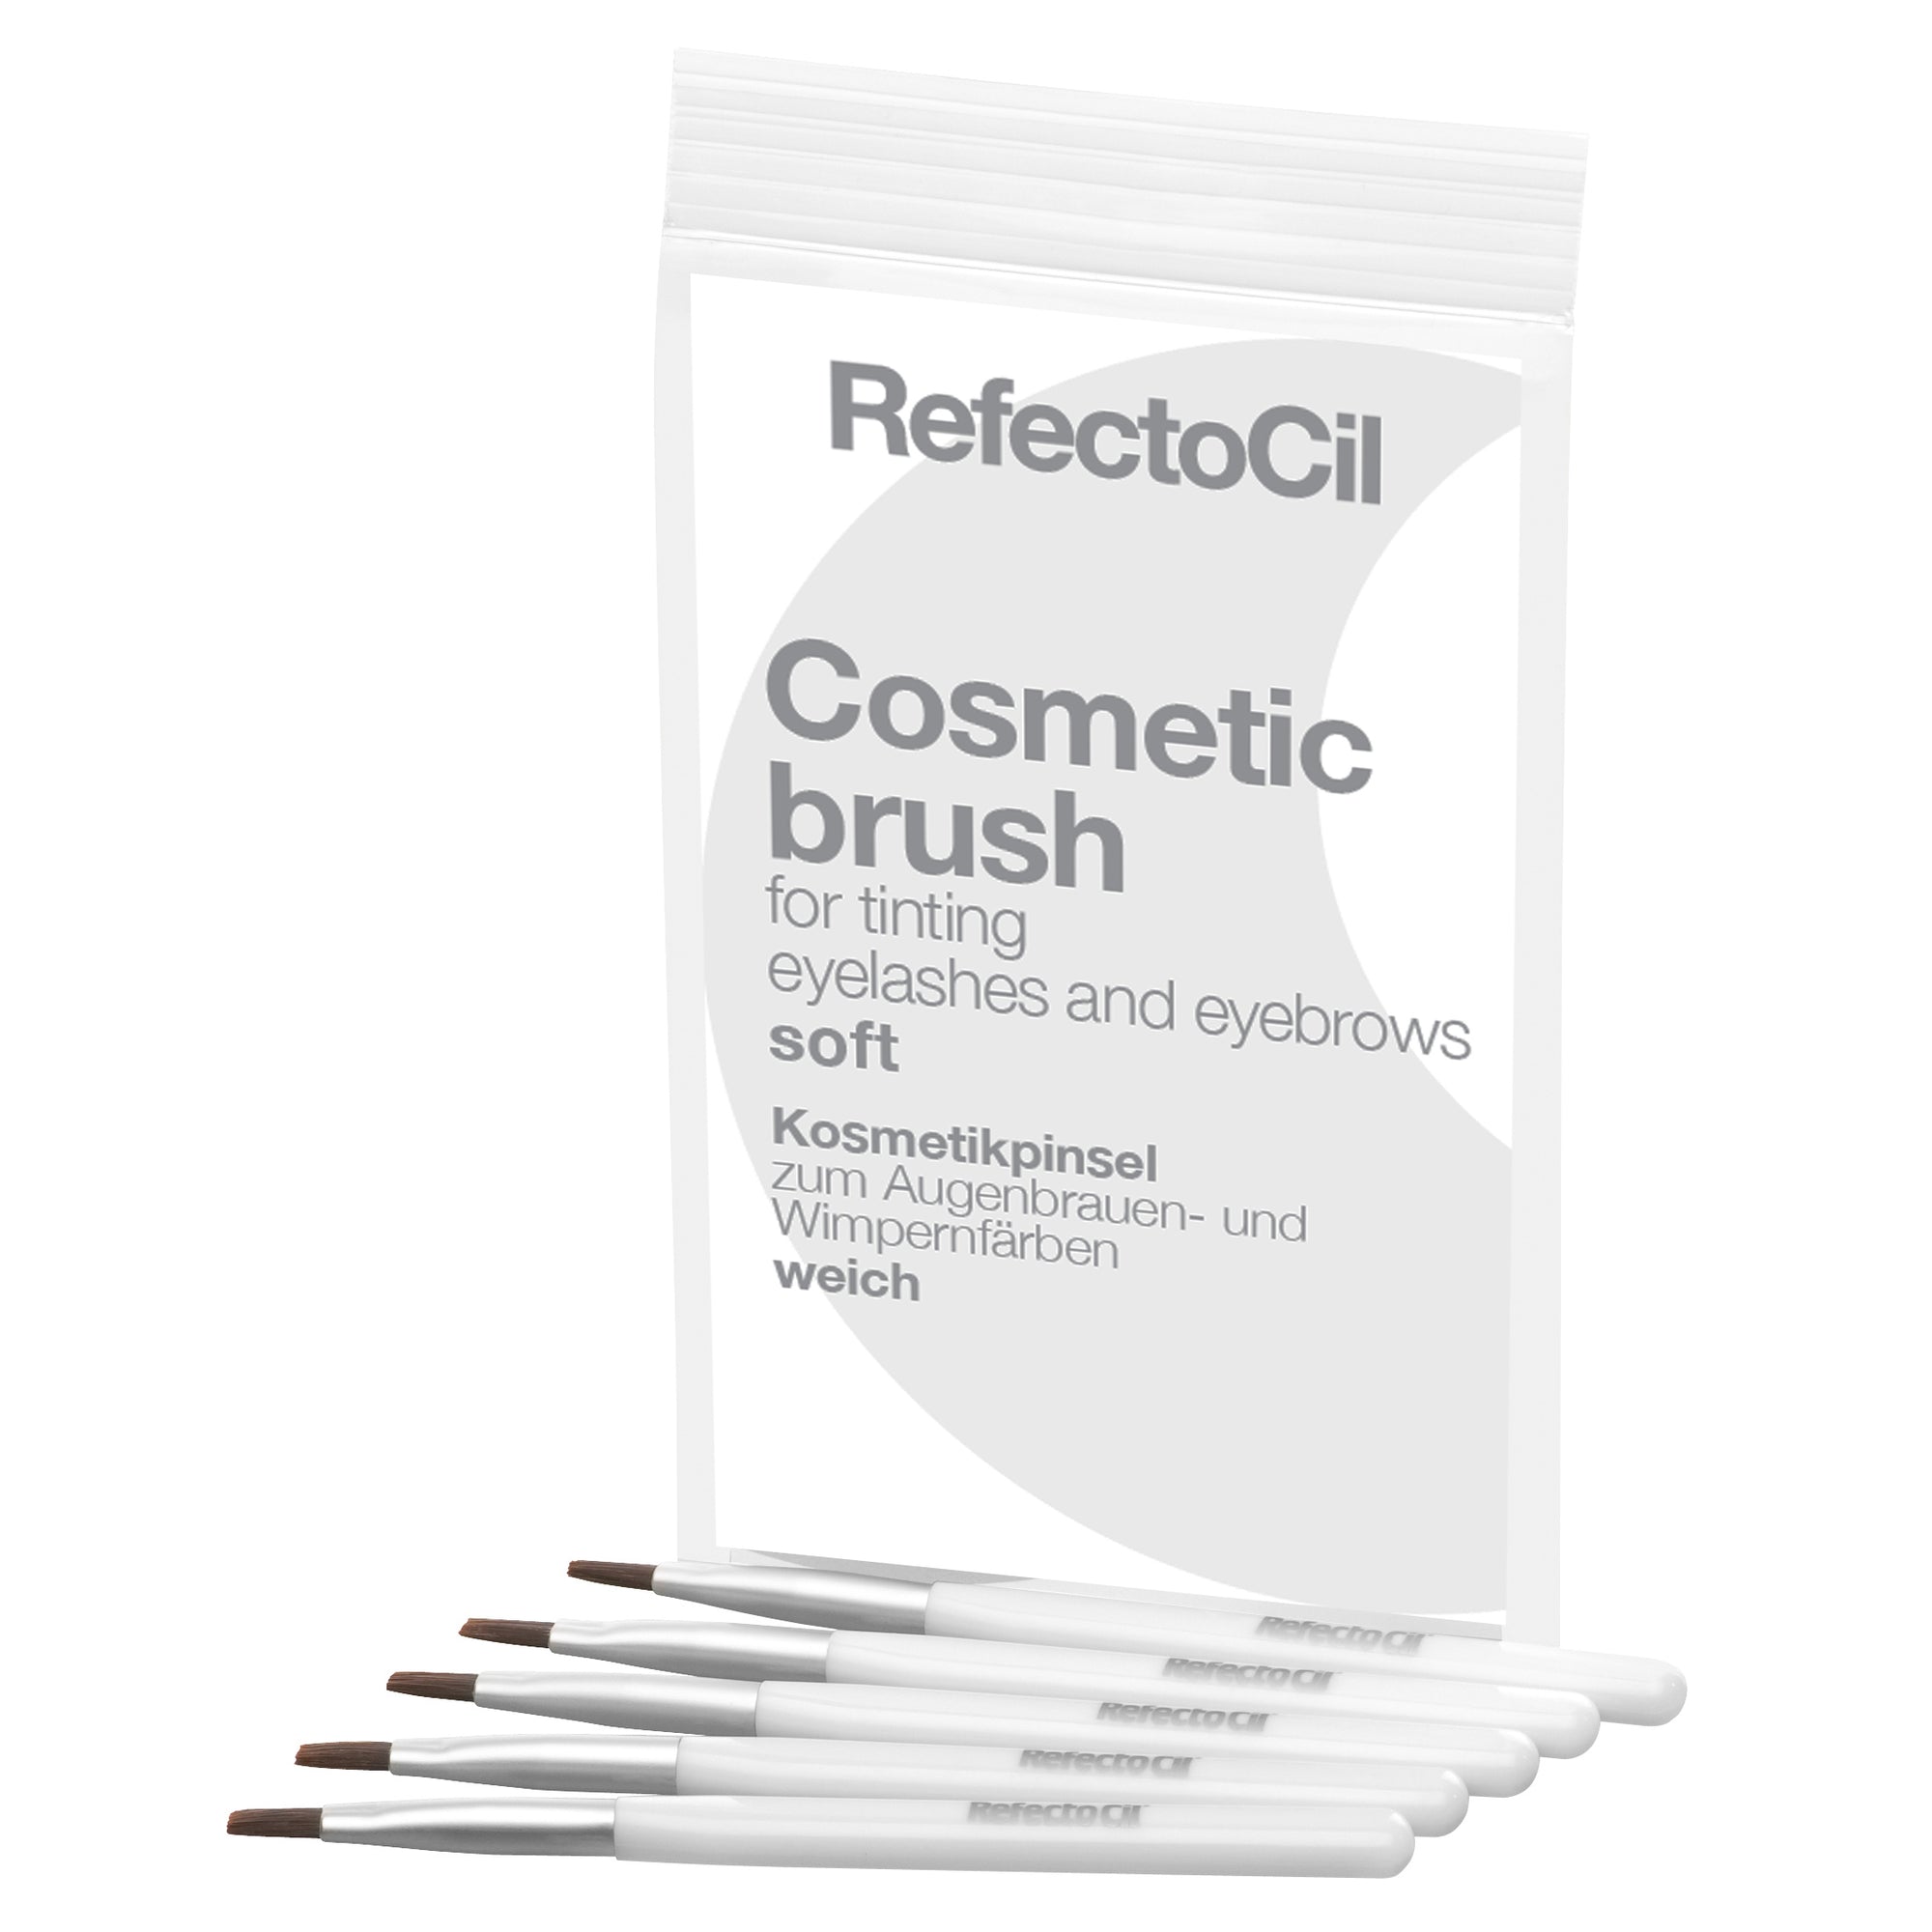 Refectocil Cosmetic brushes 5pc